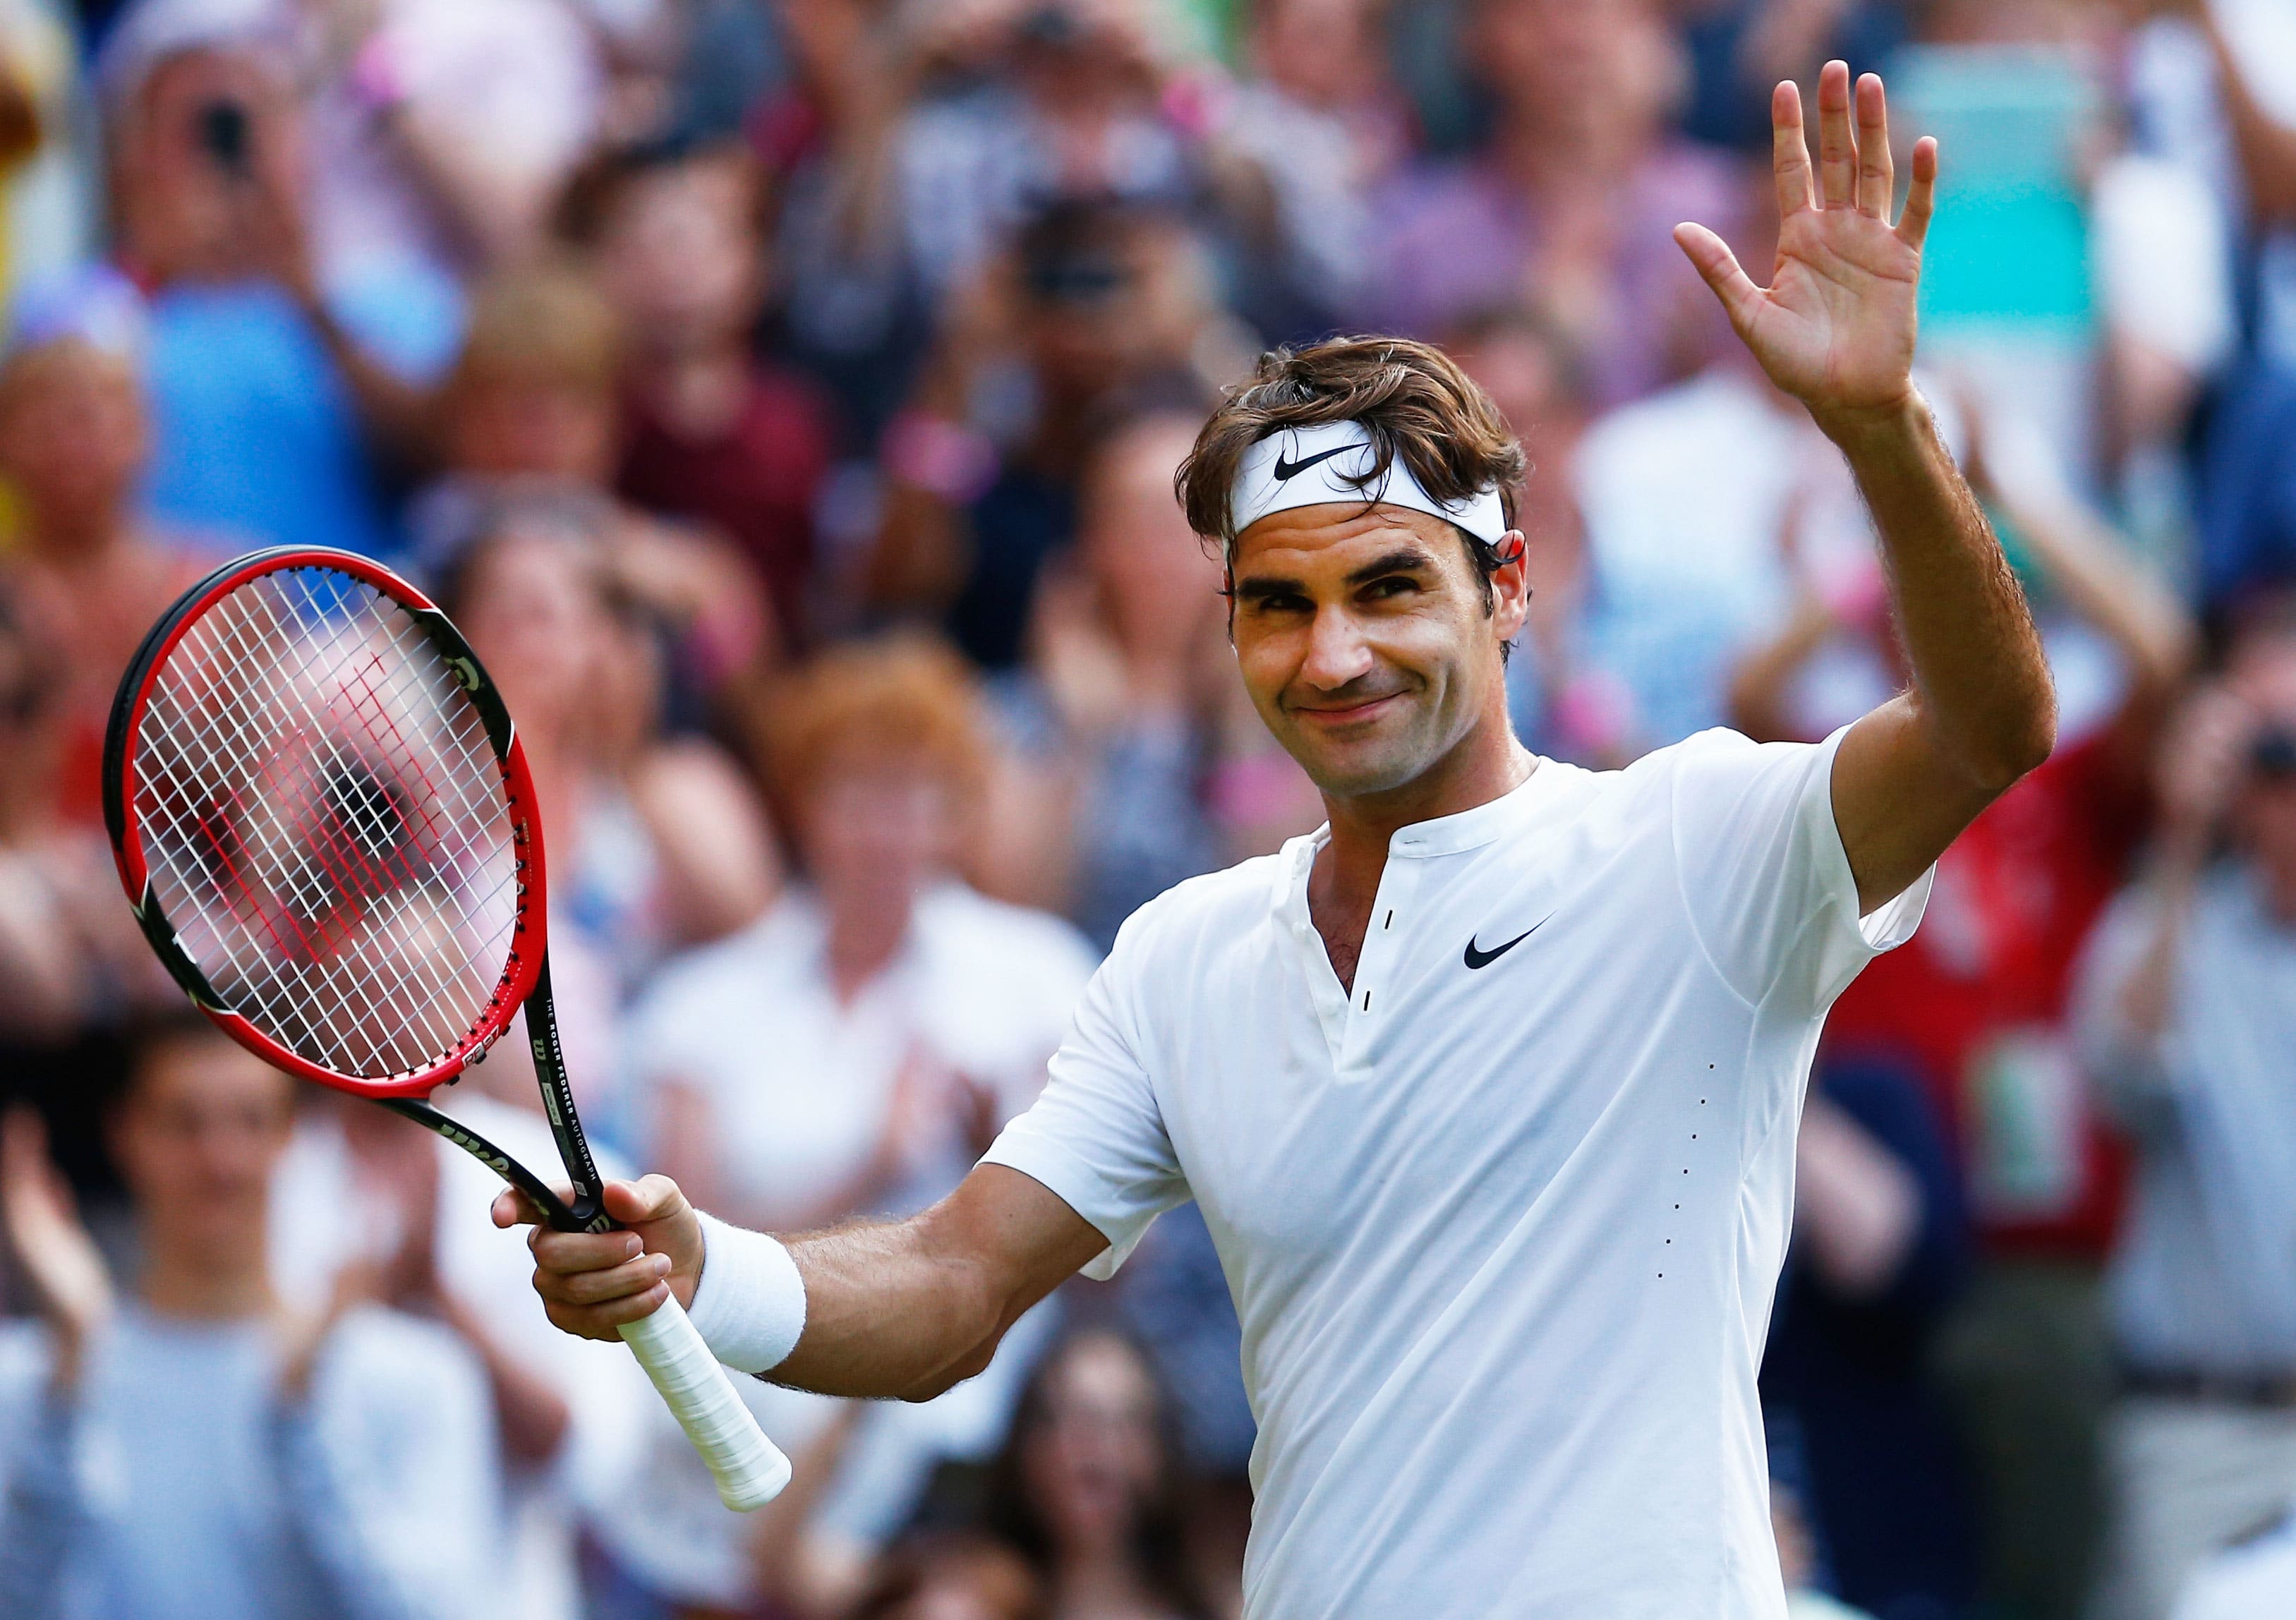 Roger Federer, Swiss tennis great, announces hes leaving the sport